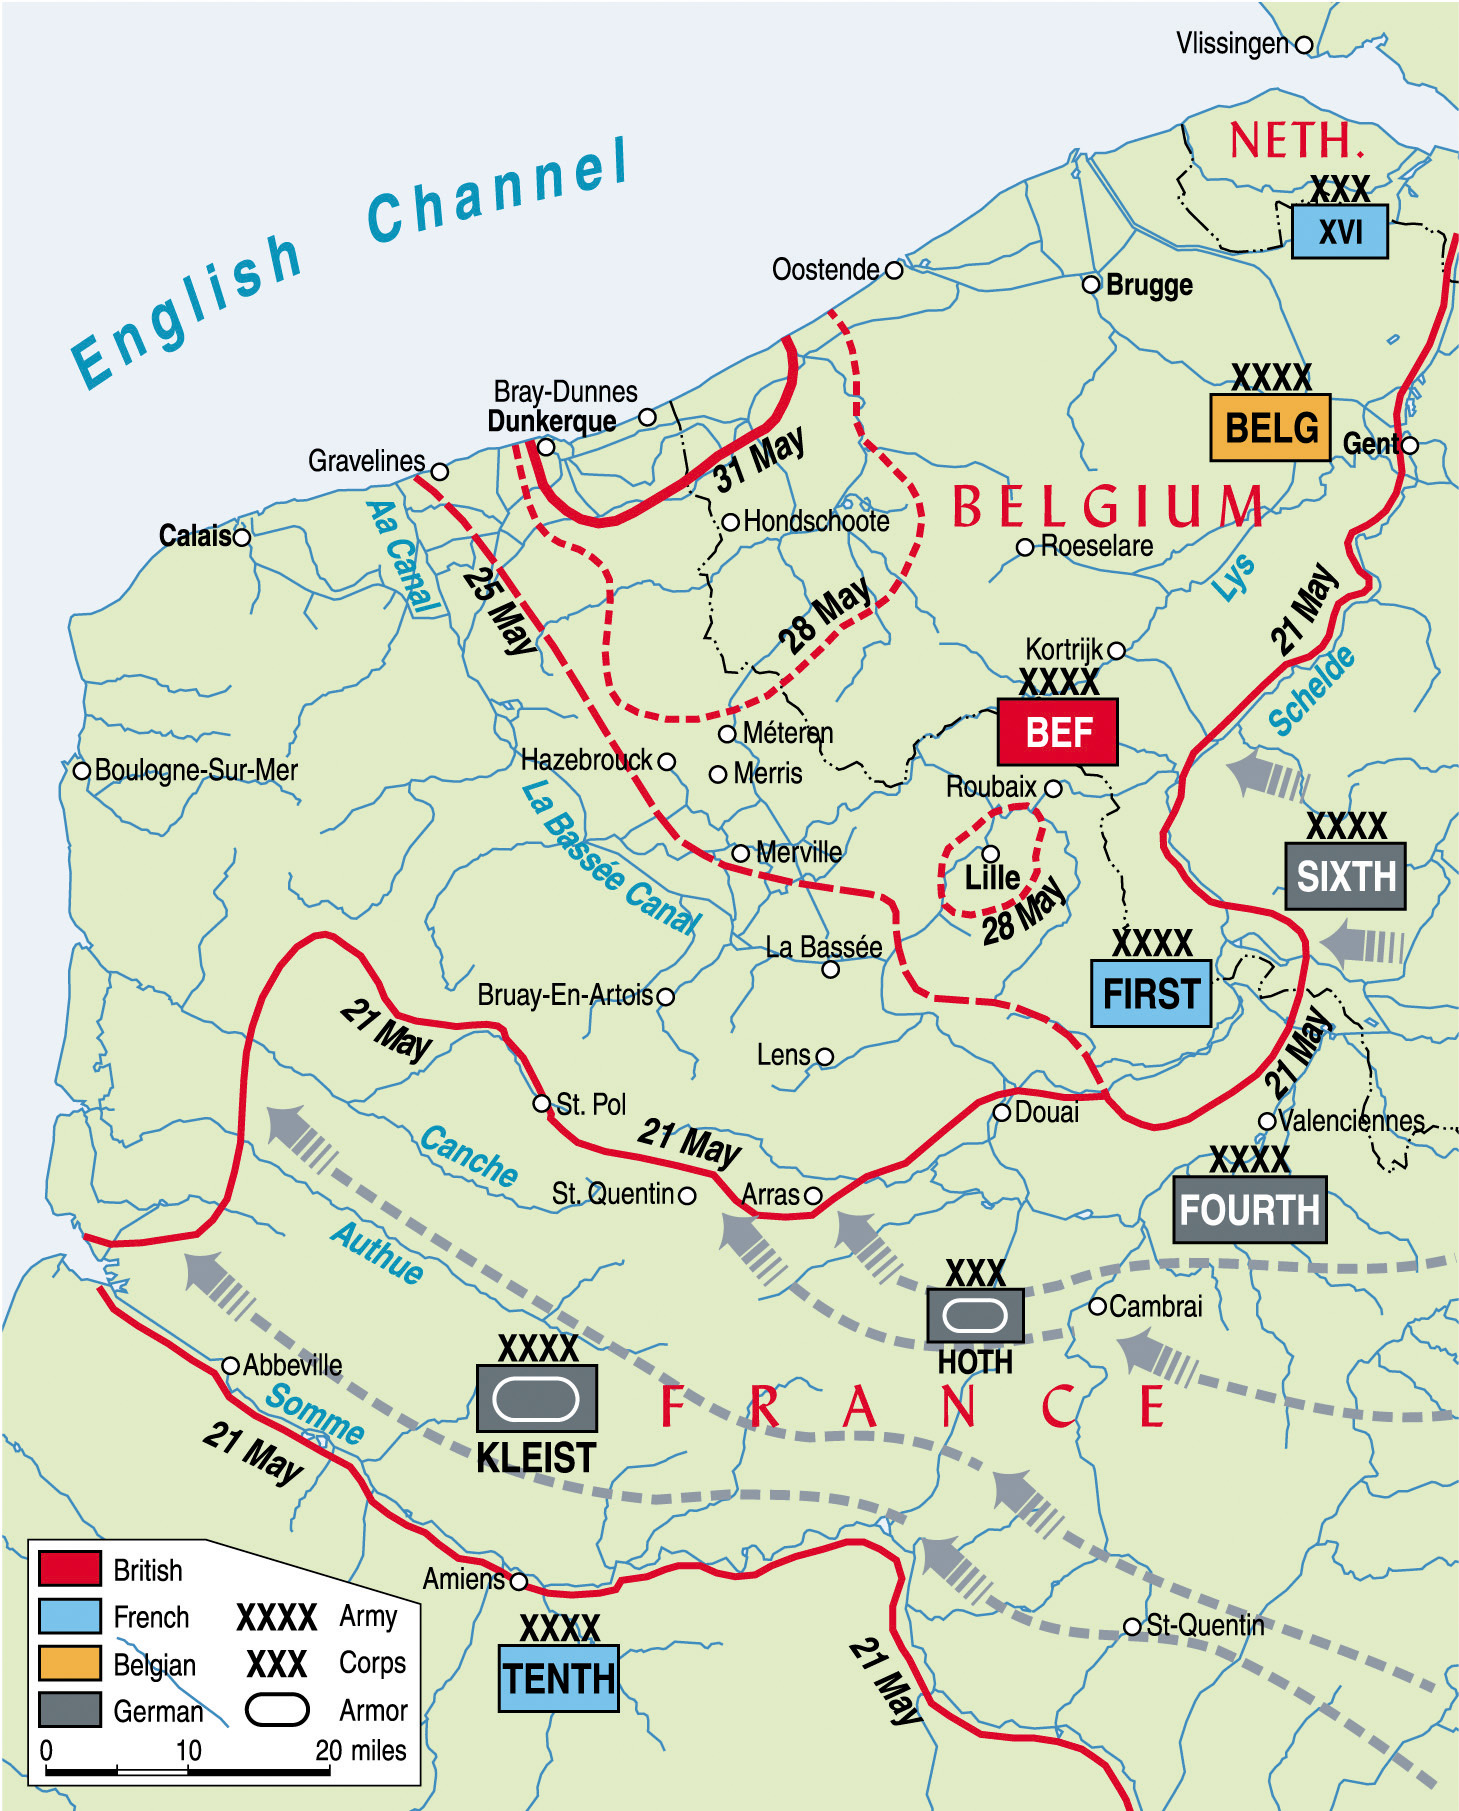 The rapid German onslaught across France in the spring of 1940 trapped the soldiers of the British Expeditionary Force and many French troops at the English Channel port of Dunkirk.